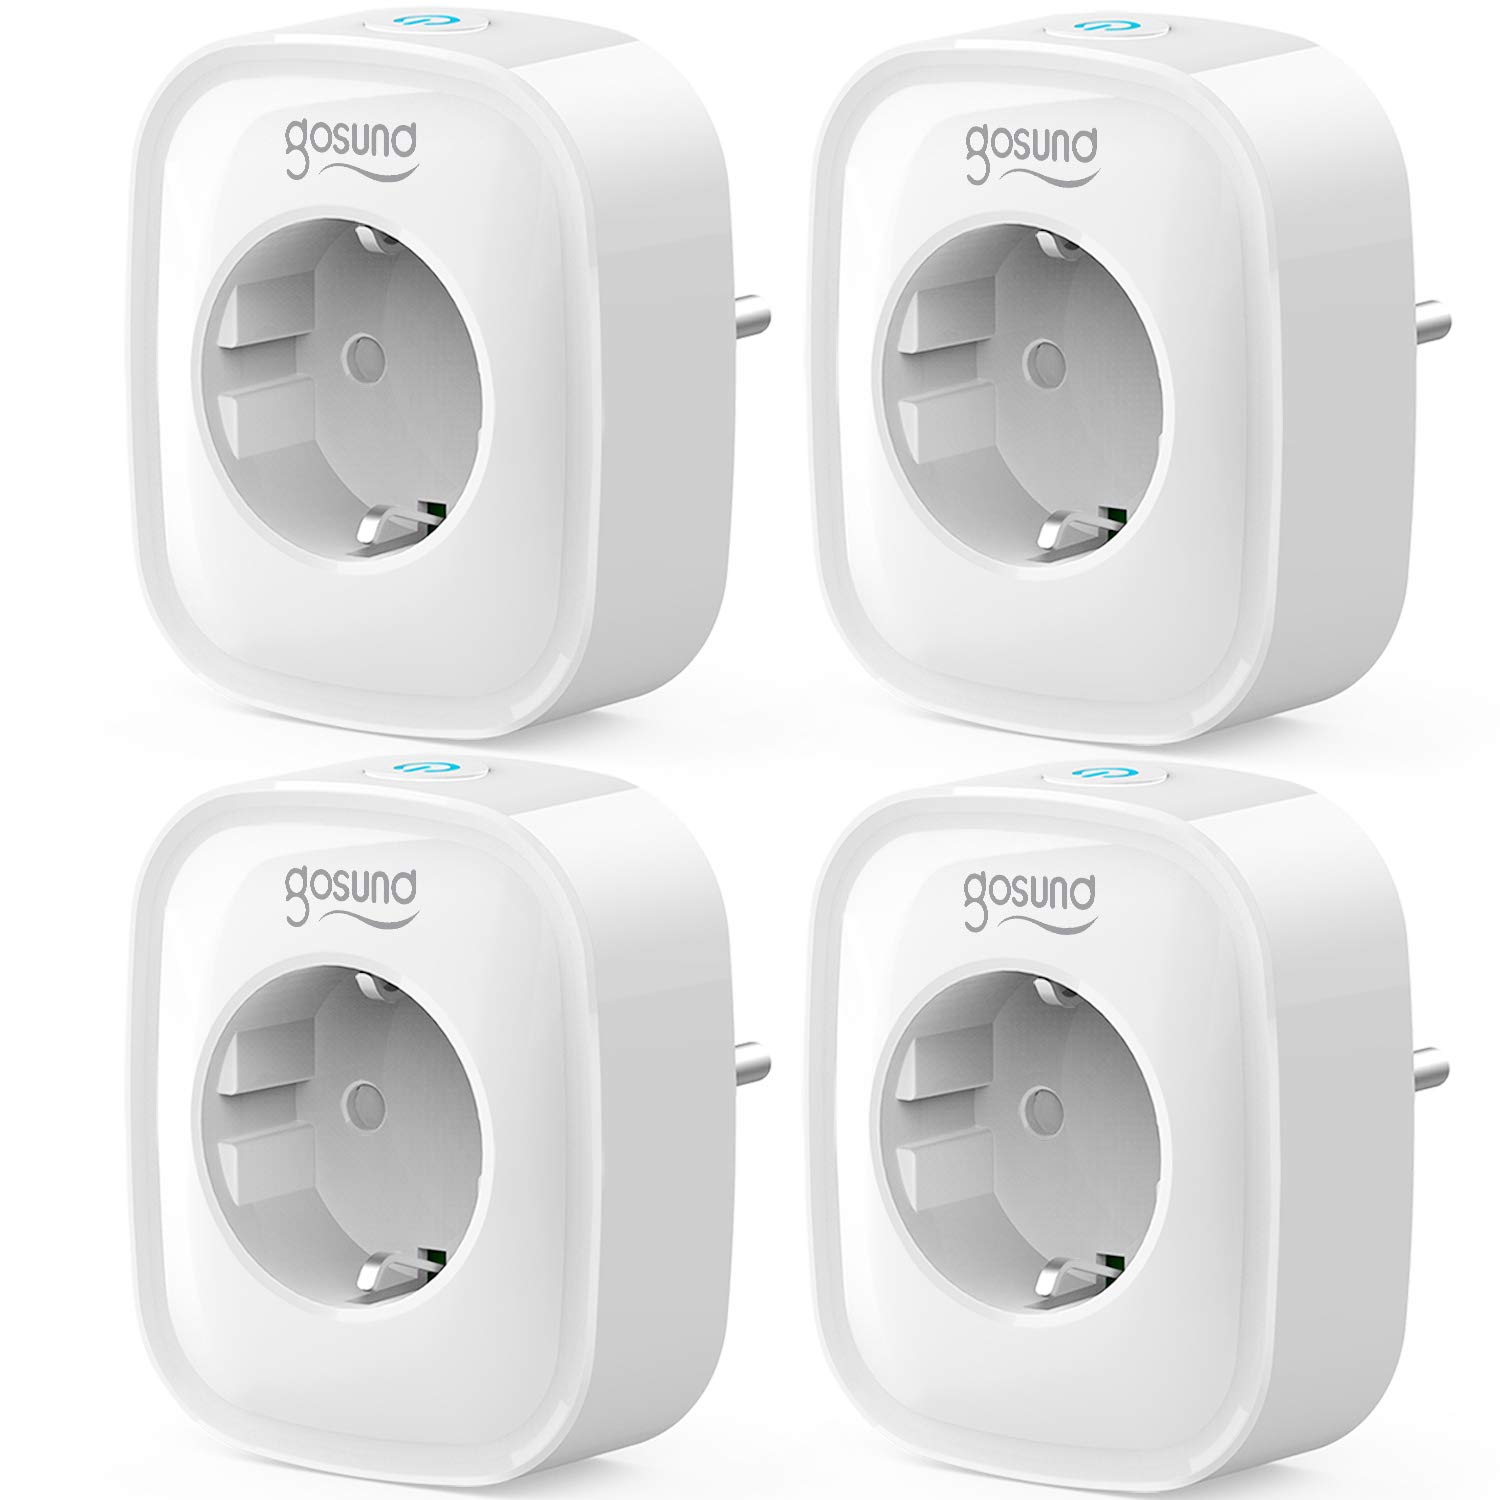 Picture showing 4 gosund wall plugs